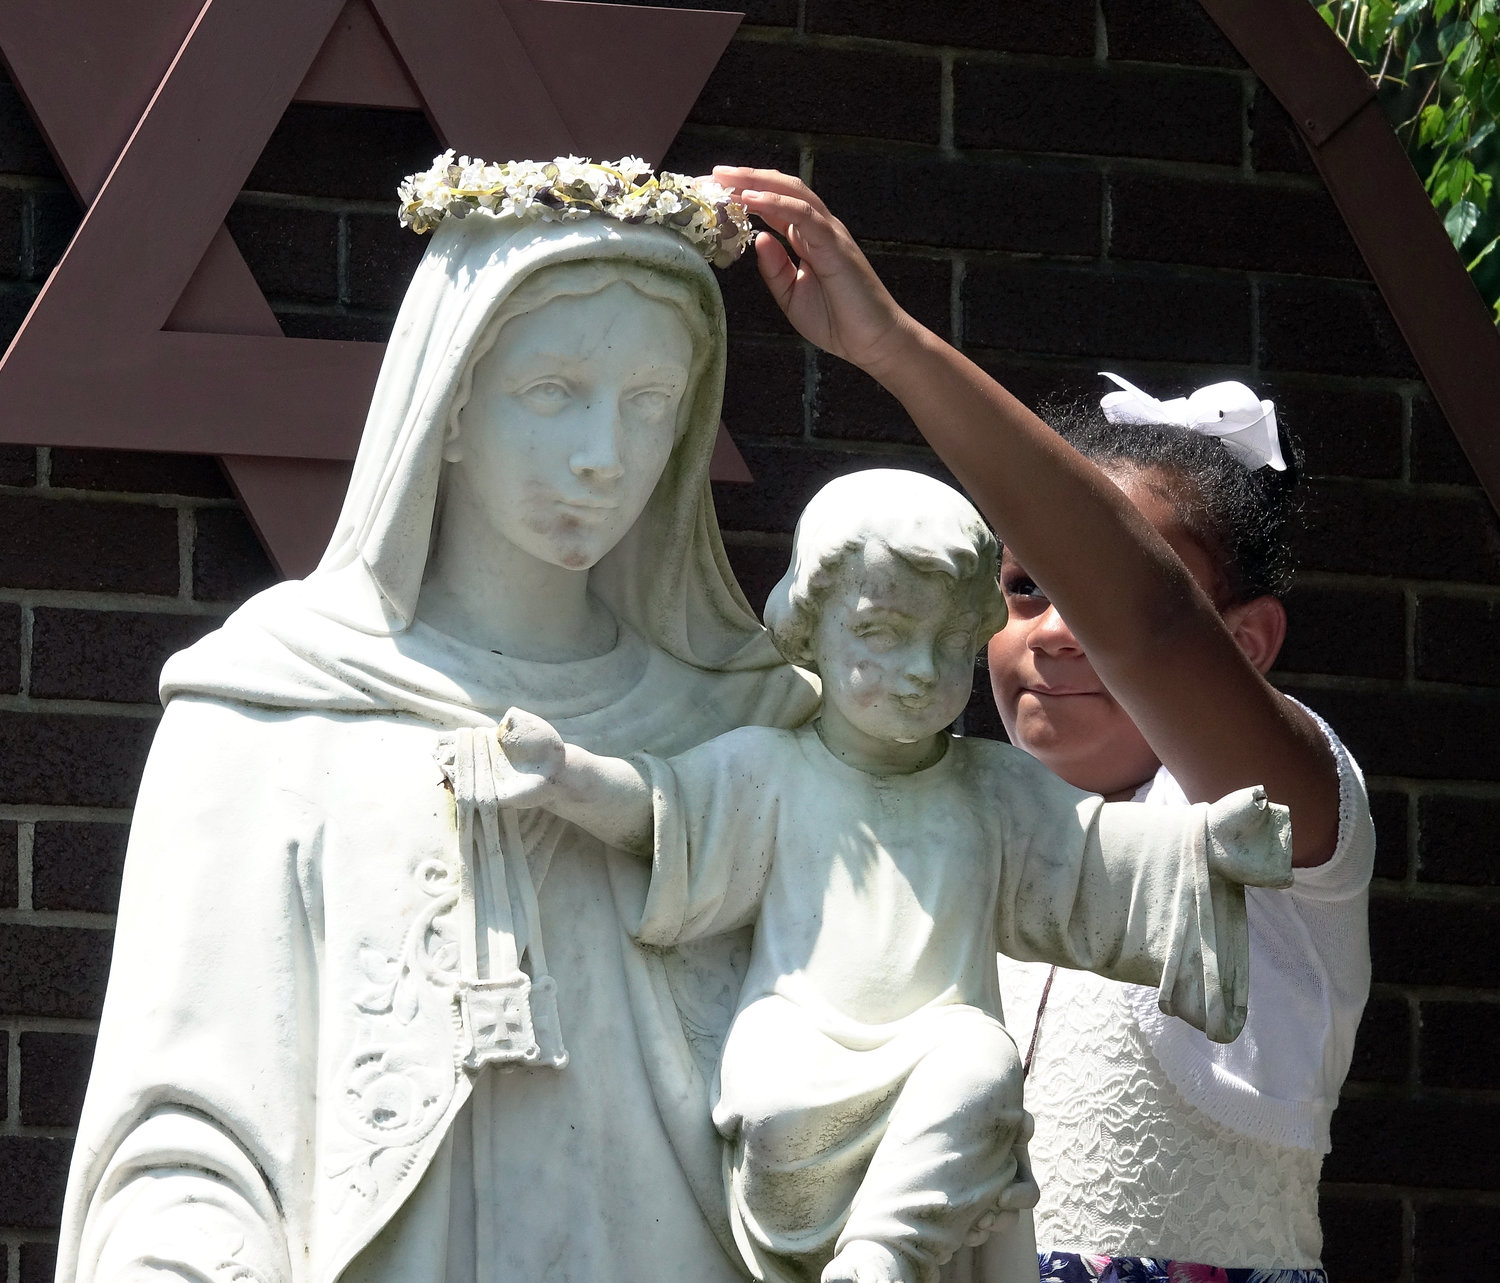 A girl crowns a statue of the Virgin Mary July 16, the feast of Our Lady of Mount Carmel, outside the National Shrine of Our Lady of Mount Carmel in Middletown. Women pray during the Mass.